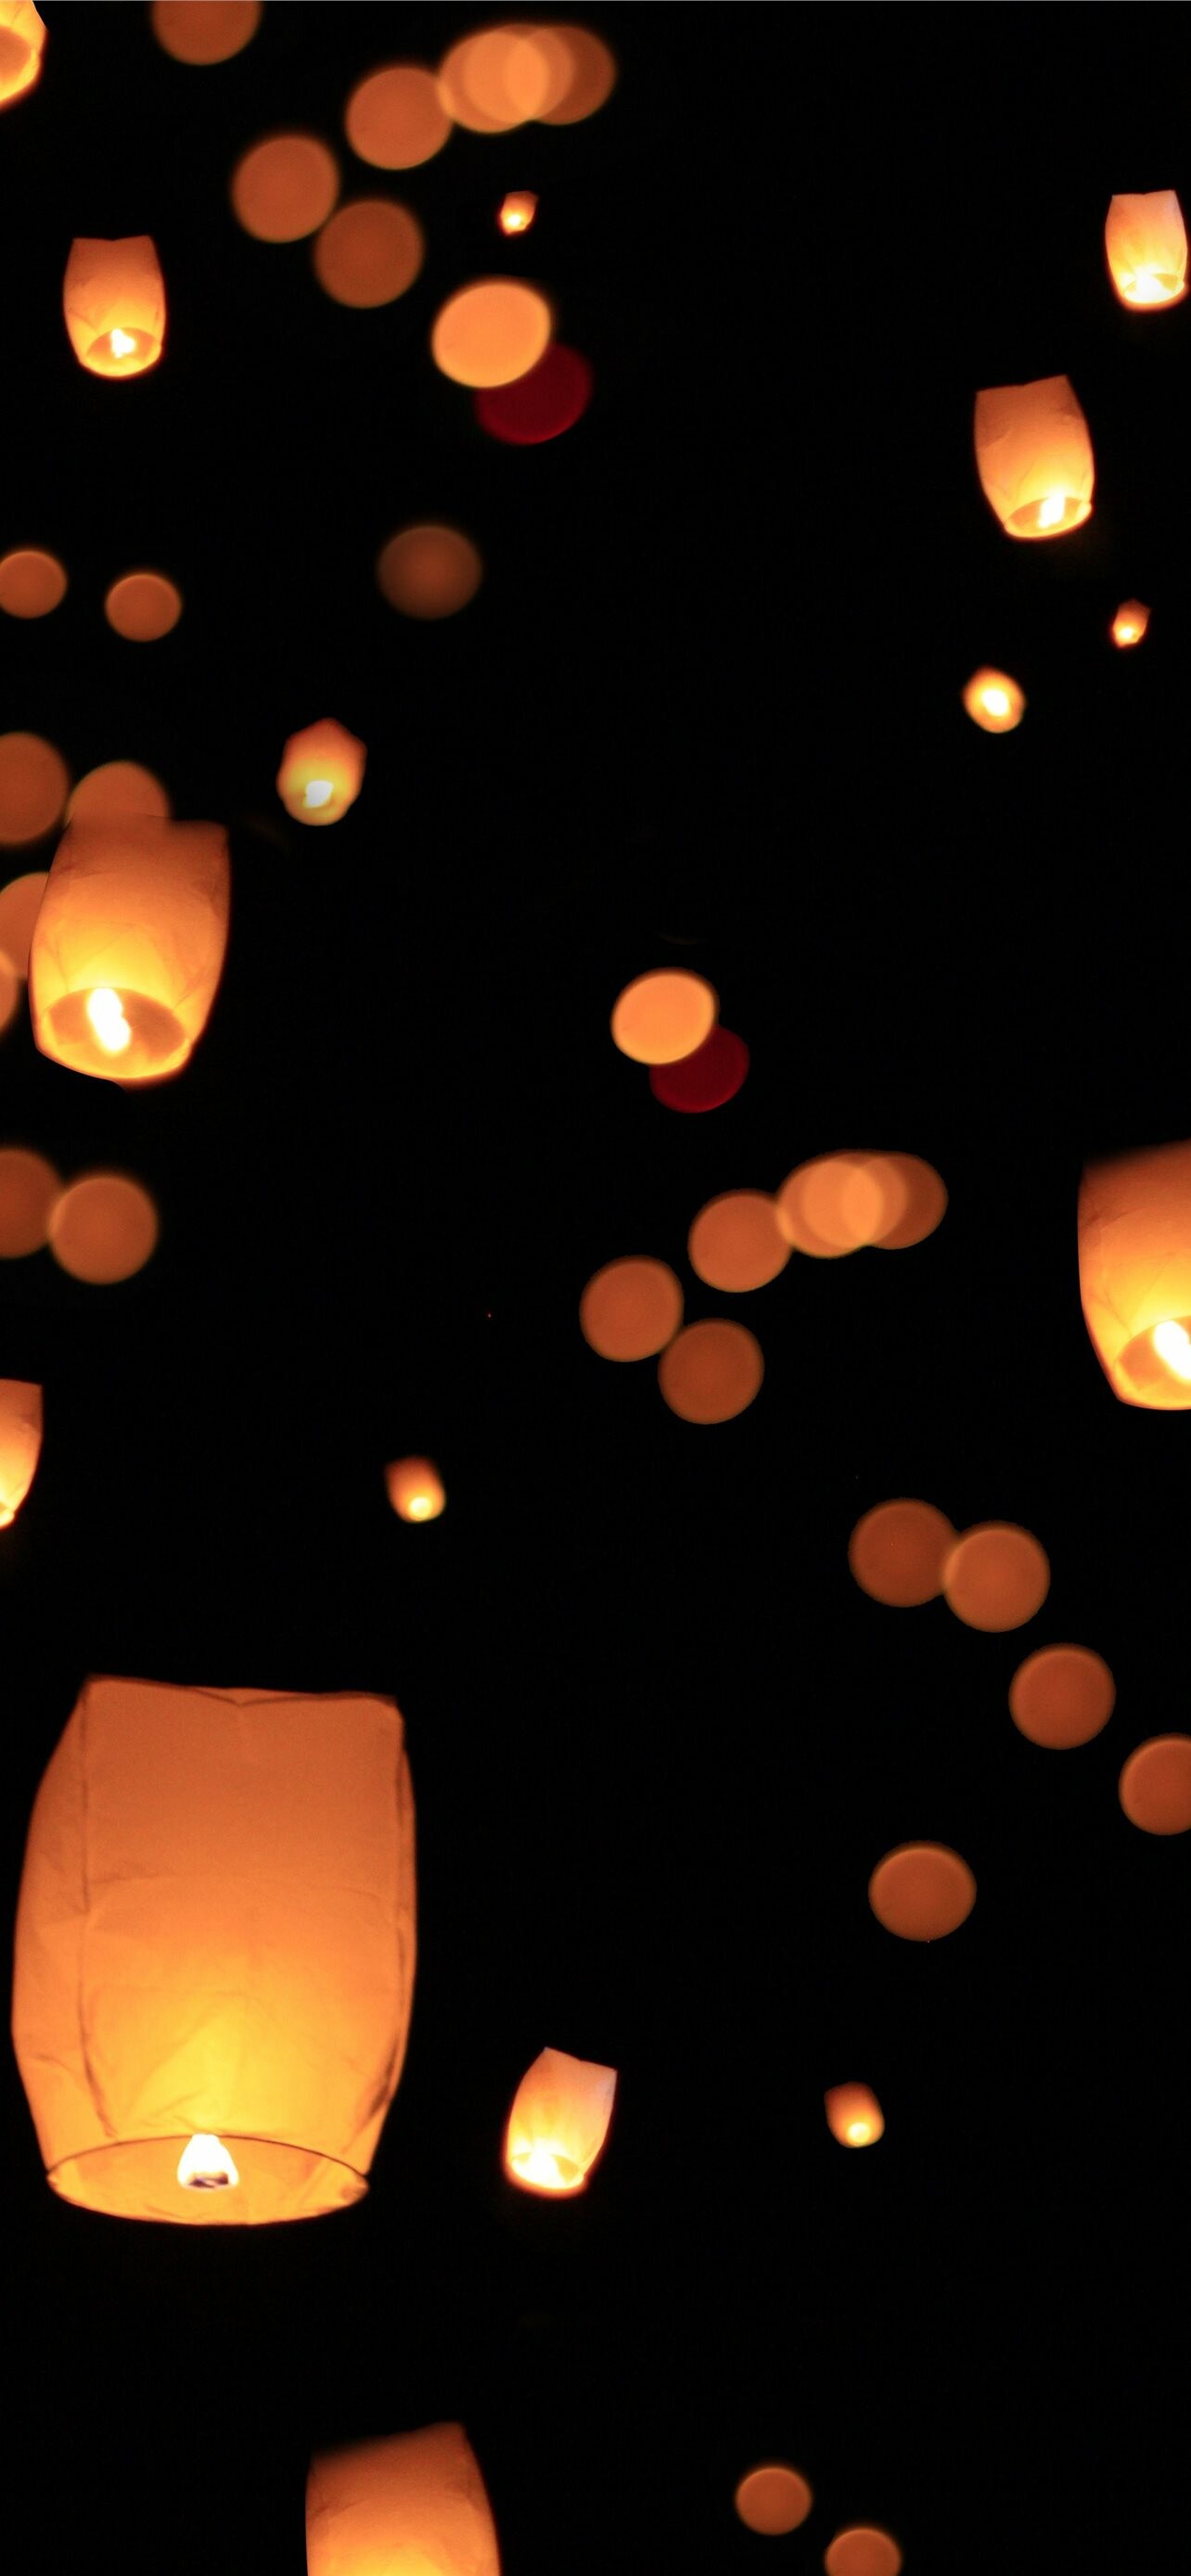 Lantern Festival: The 15th day of the first month of the Chinese lunar calendar, Tradition. 1290x2780 HD Wallpaper.